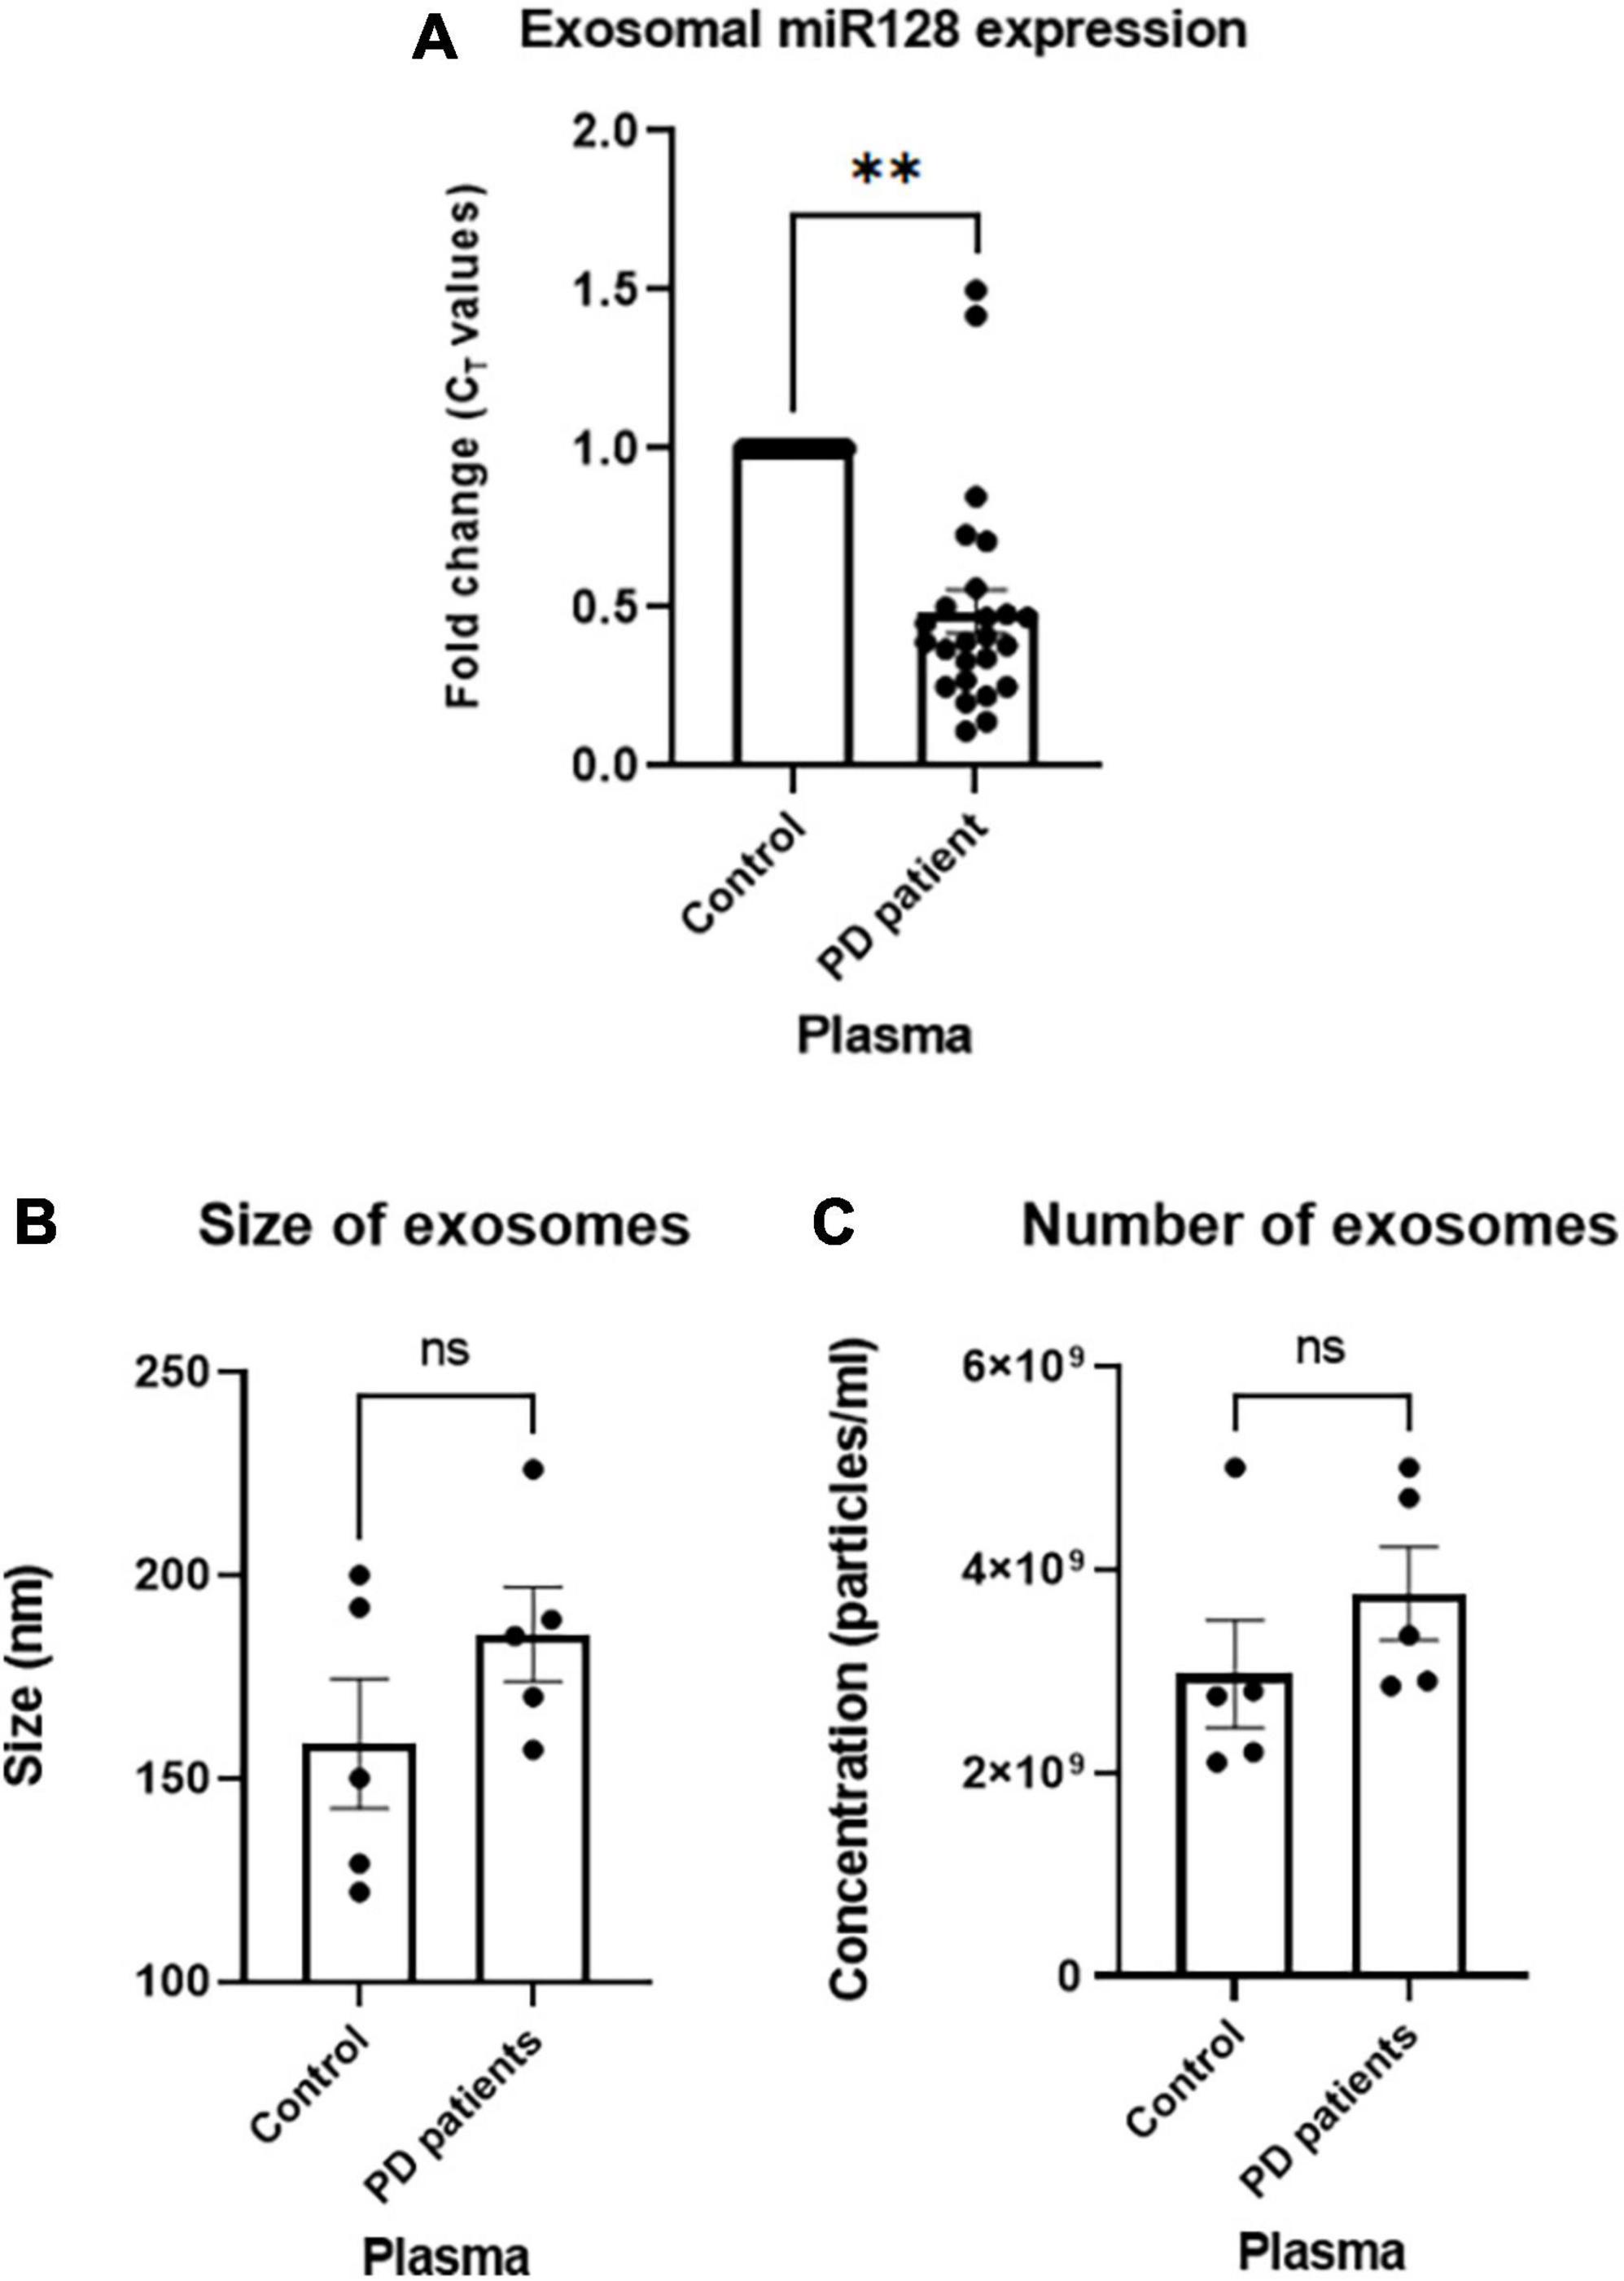 Brain-enriched miR-128: Reduced in exosomes from Parkinson’s patient plasma, improves synaptic integrity, and prevents 6-OHDA mediated neuronal apoptosis